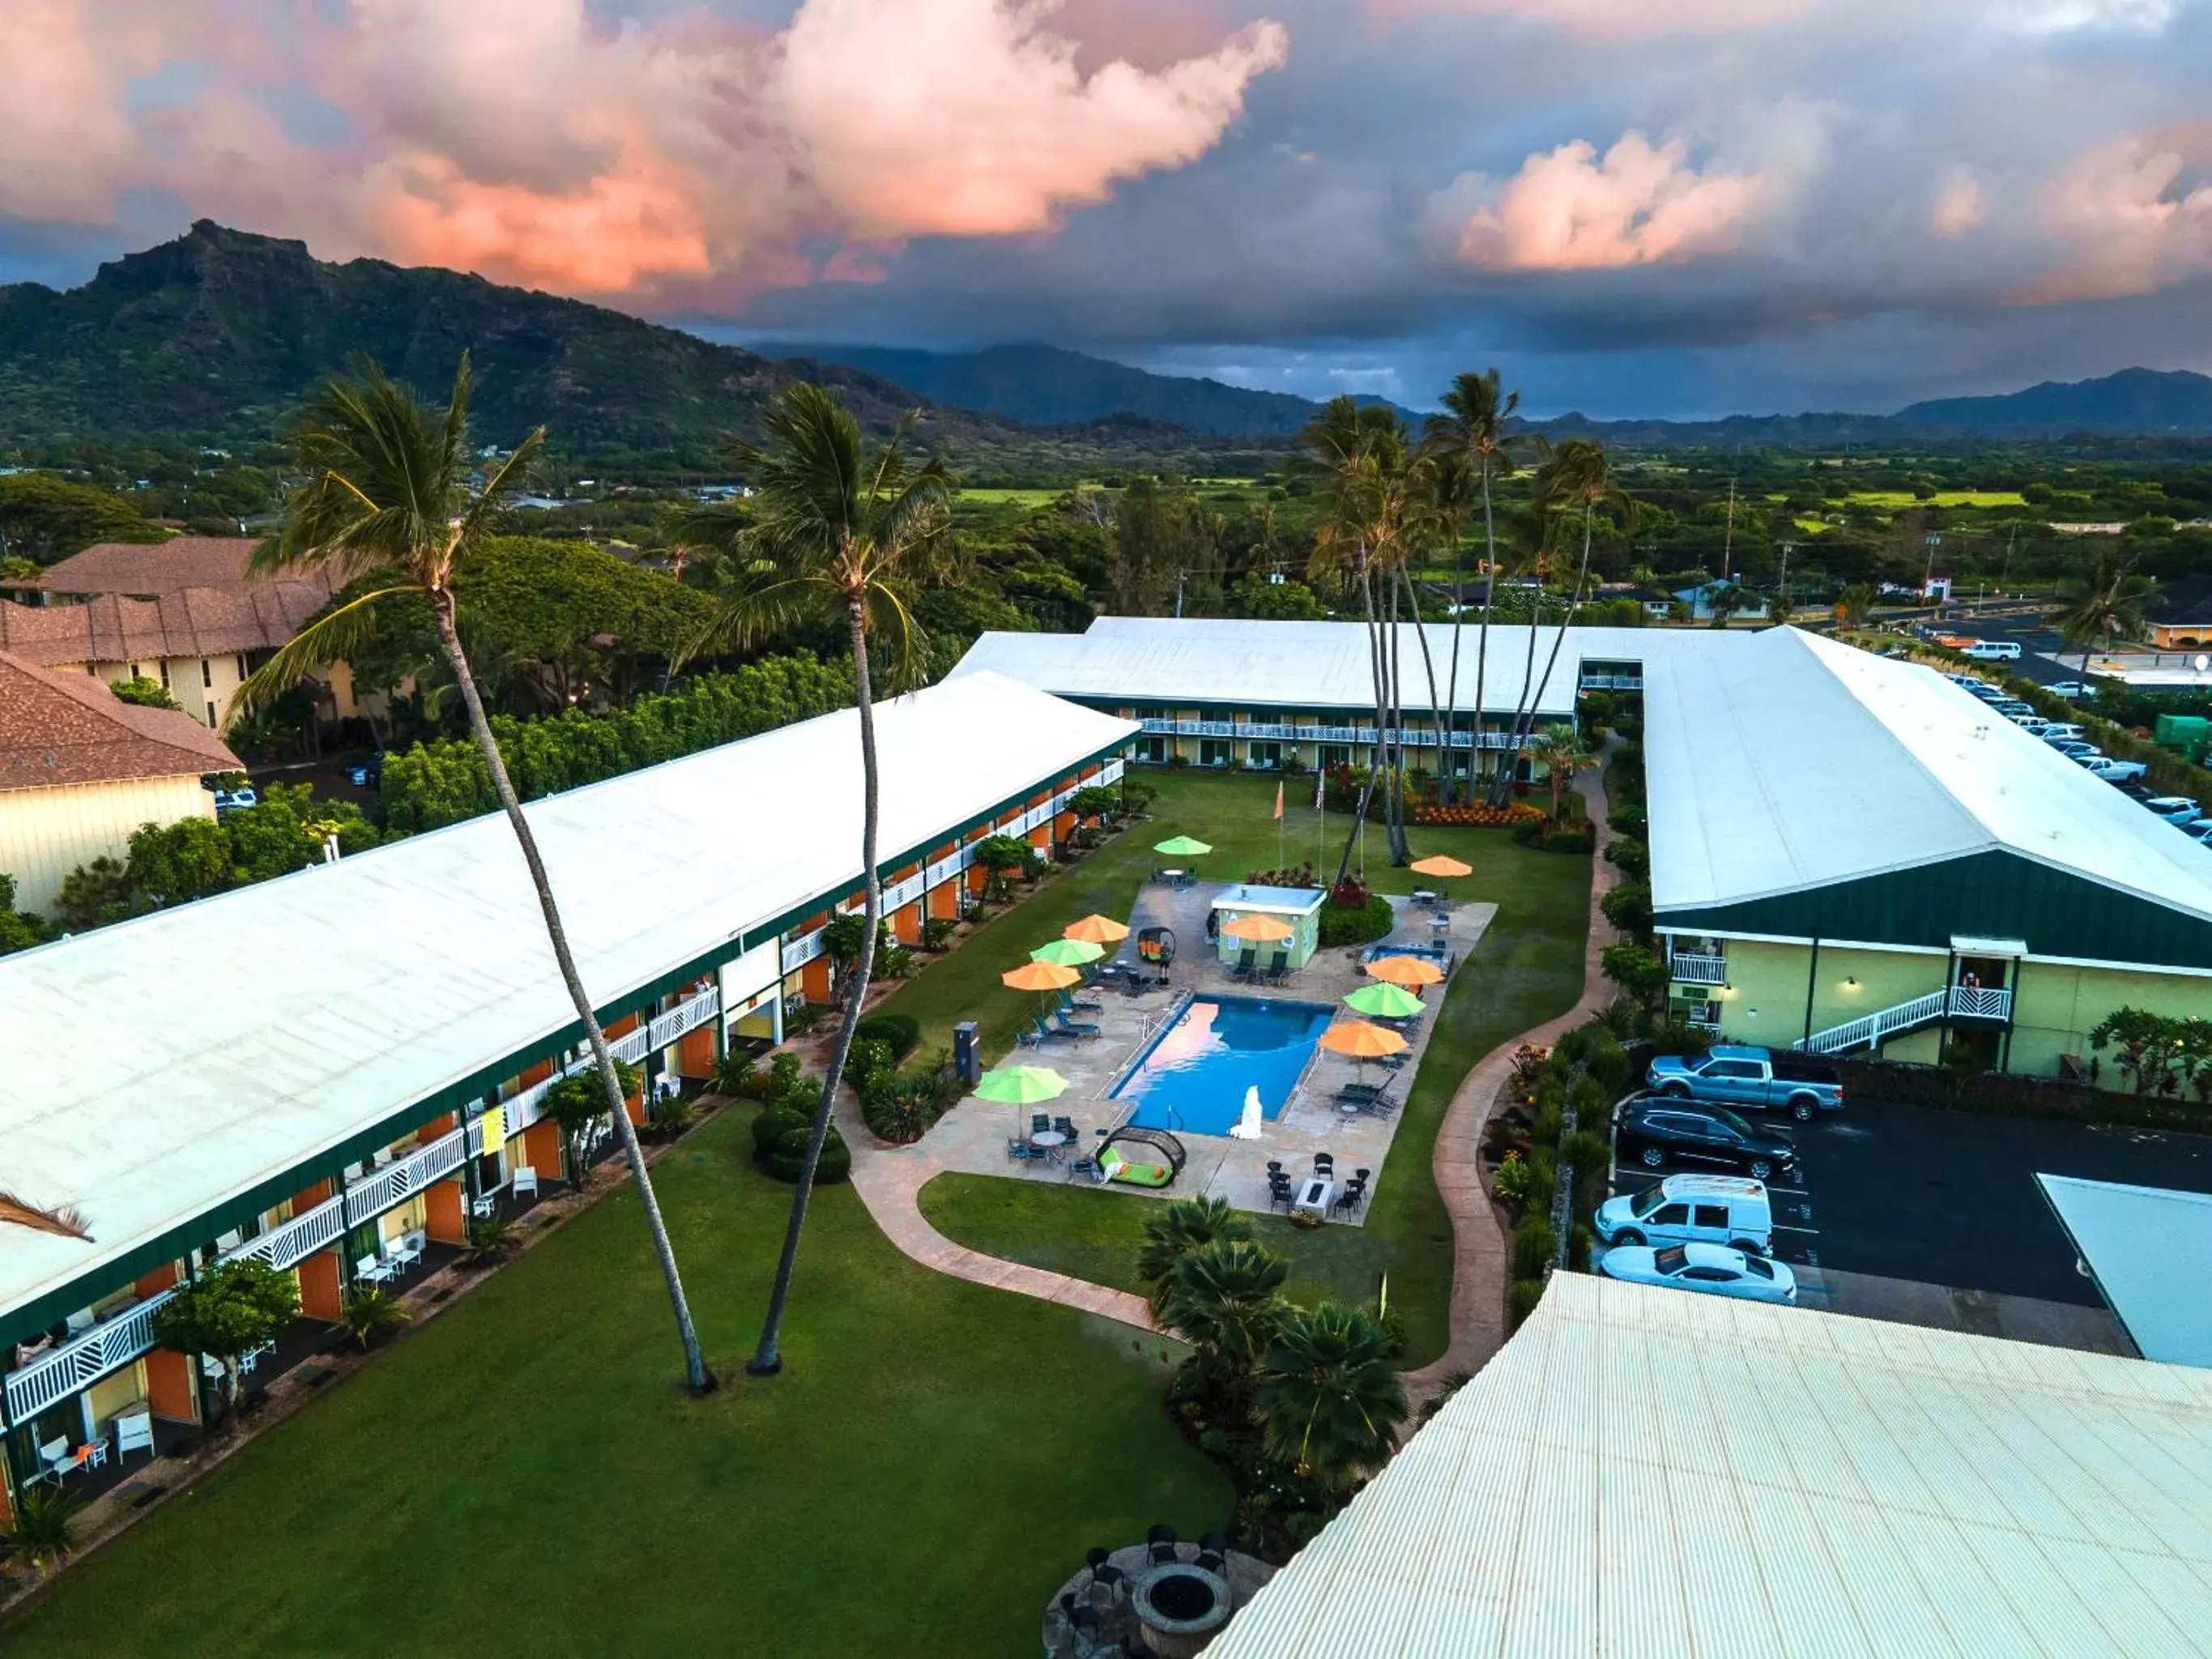 Property building, Pool View in Kauai Shores Hotel